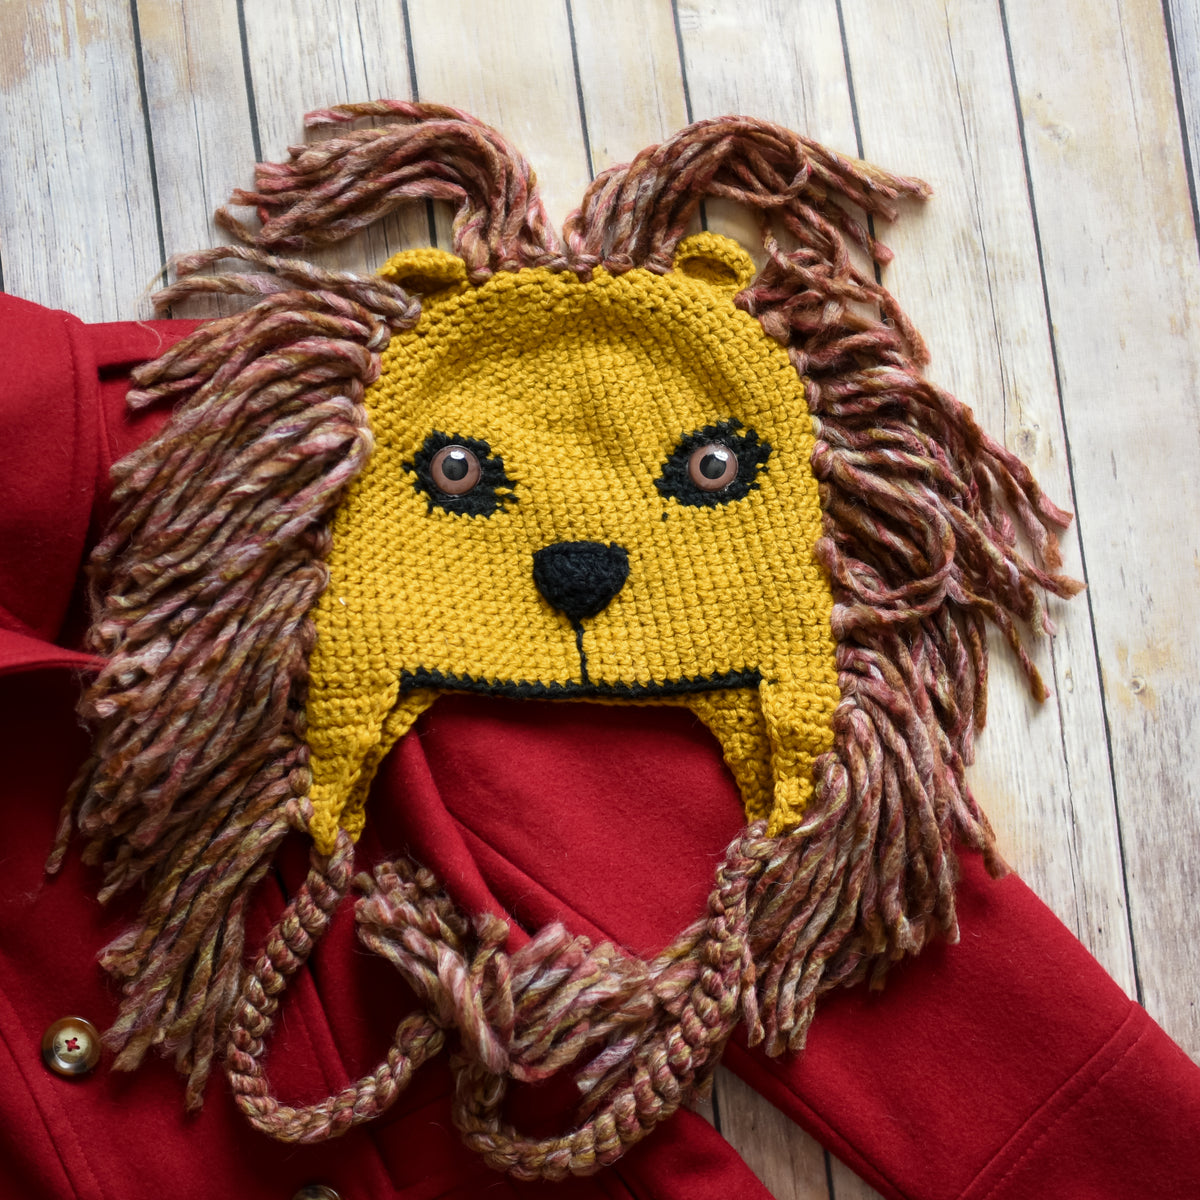 Lion hat with a knitted gold lion face and brownish red yarn mane.